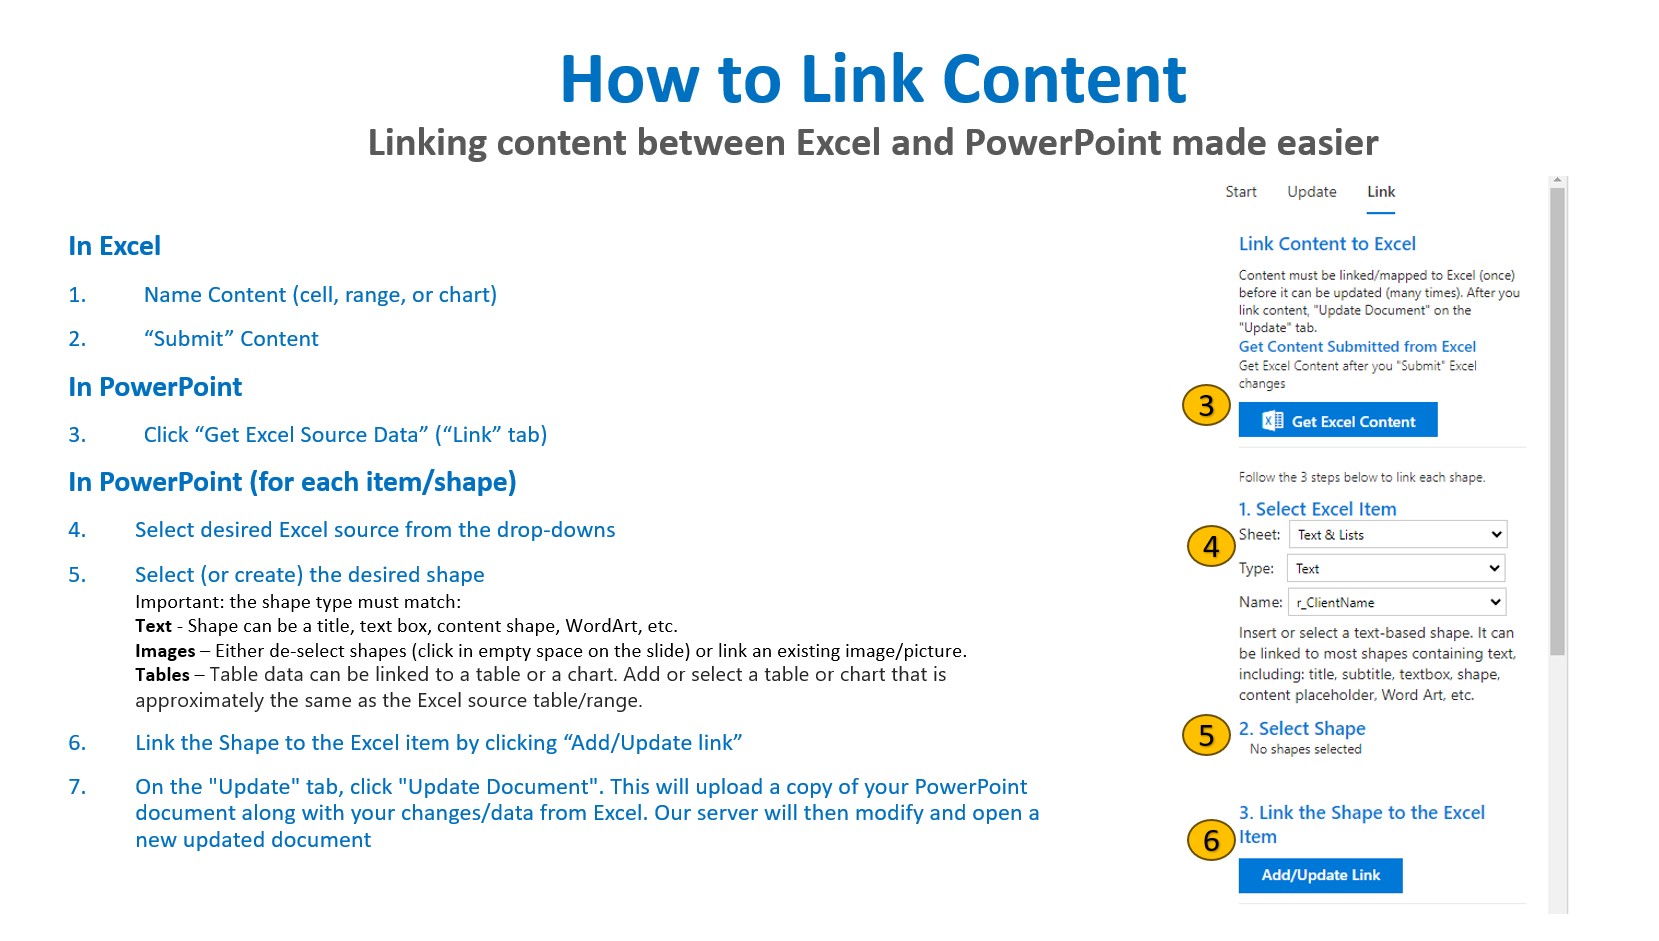 Improved method to link content between Excel and PowerPoint